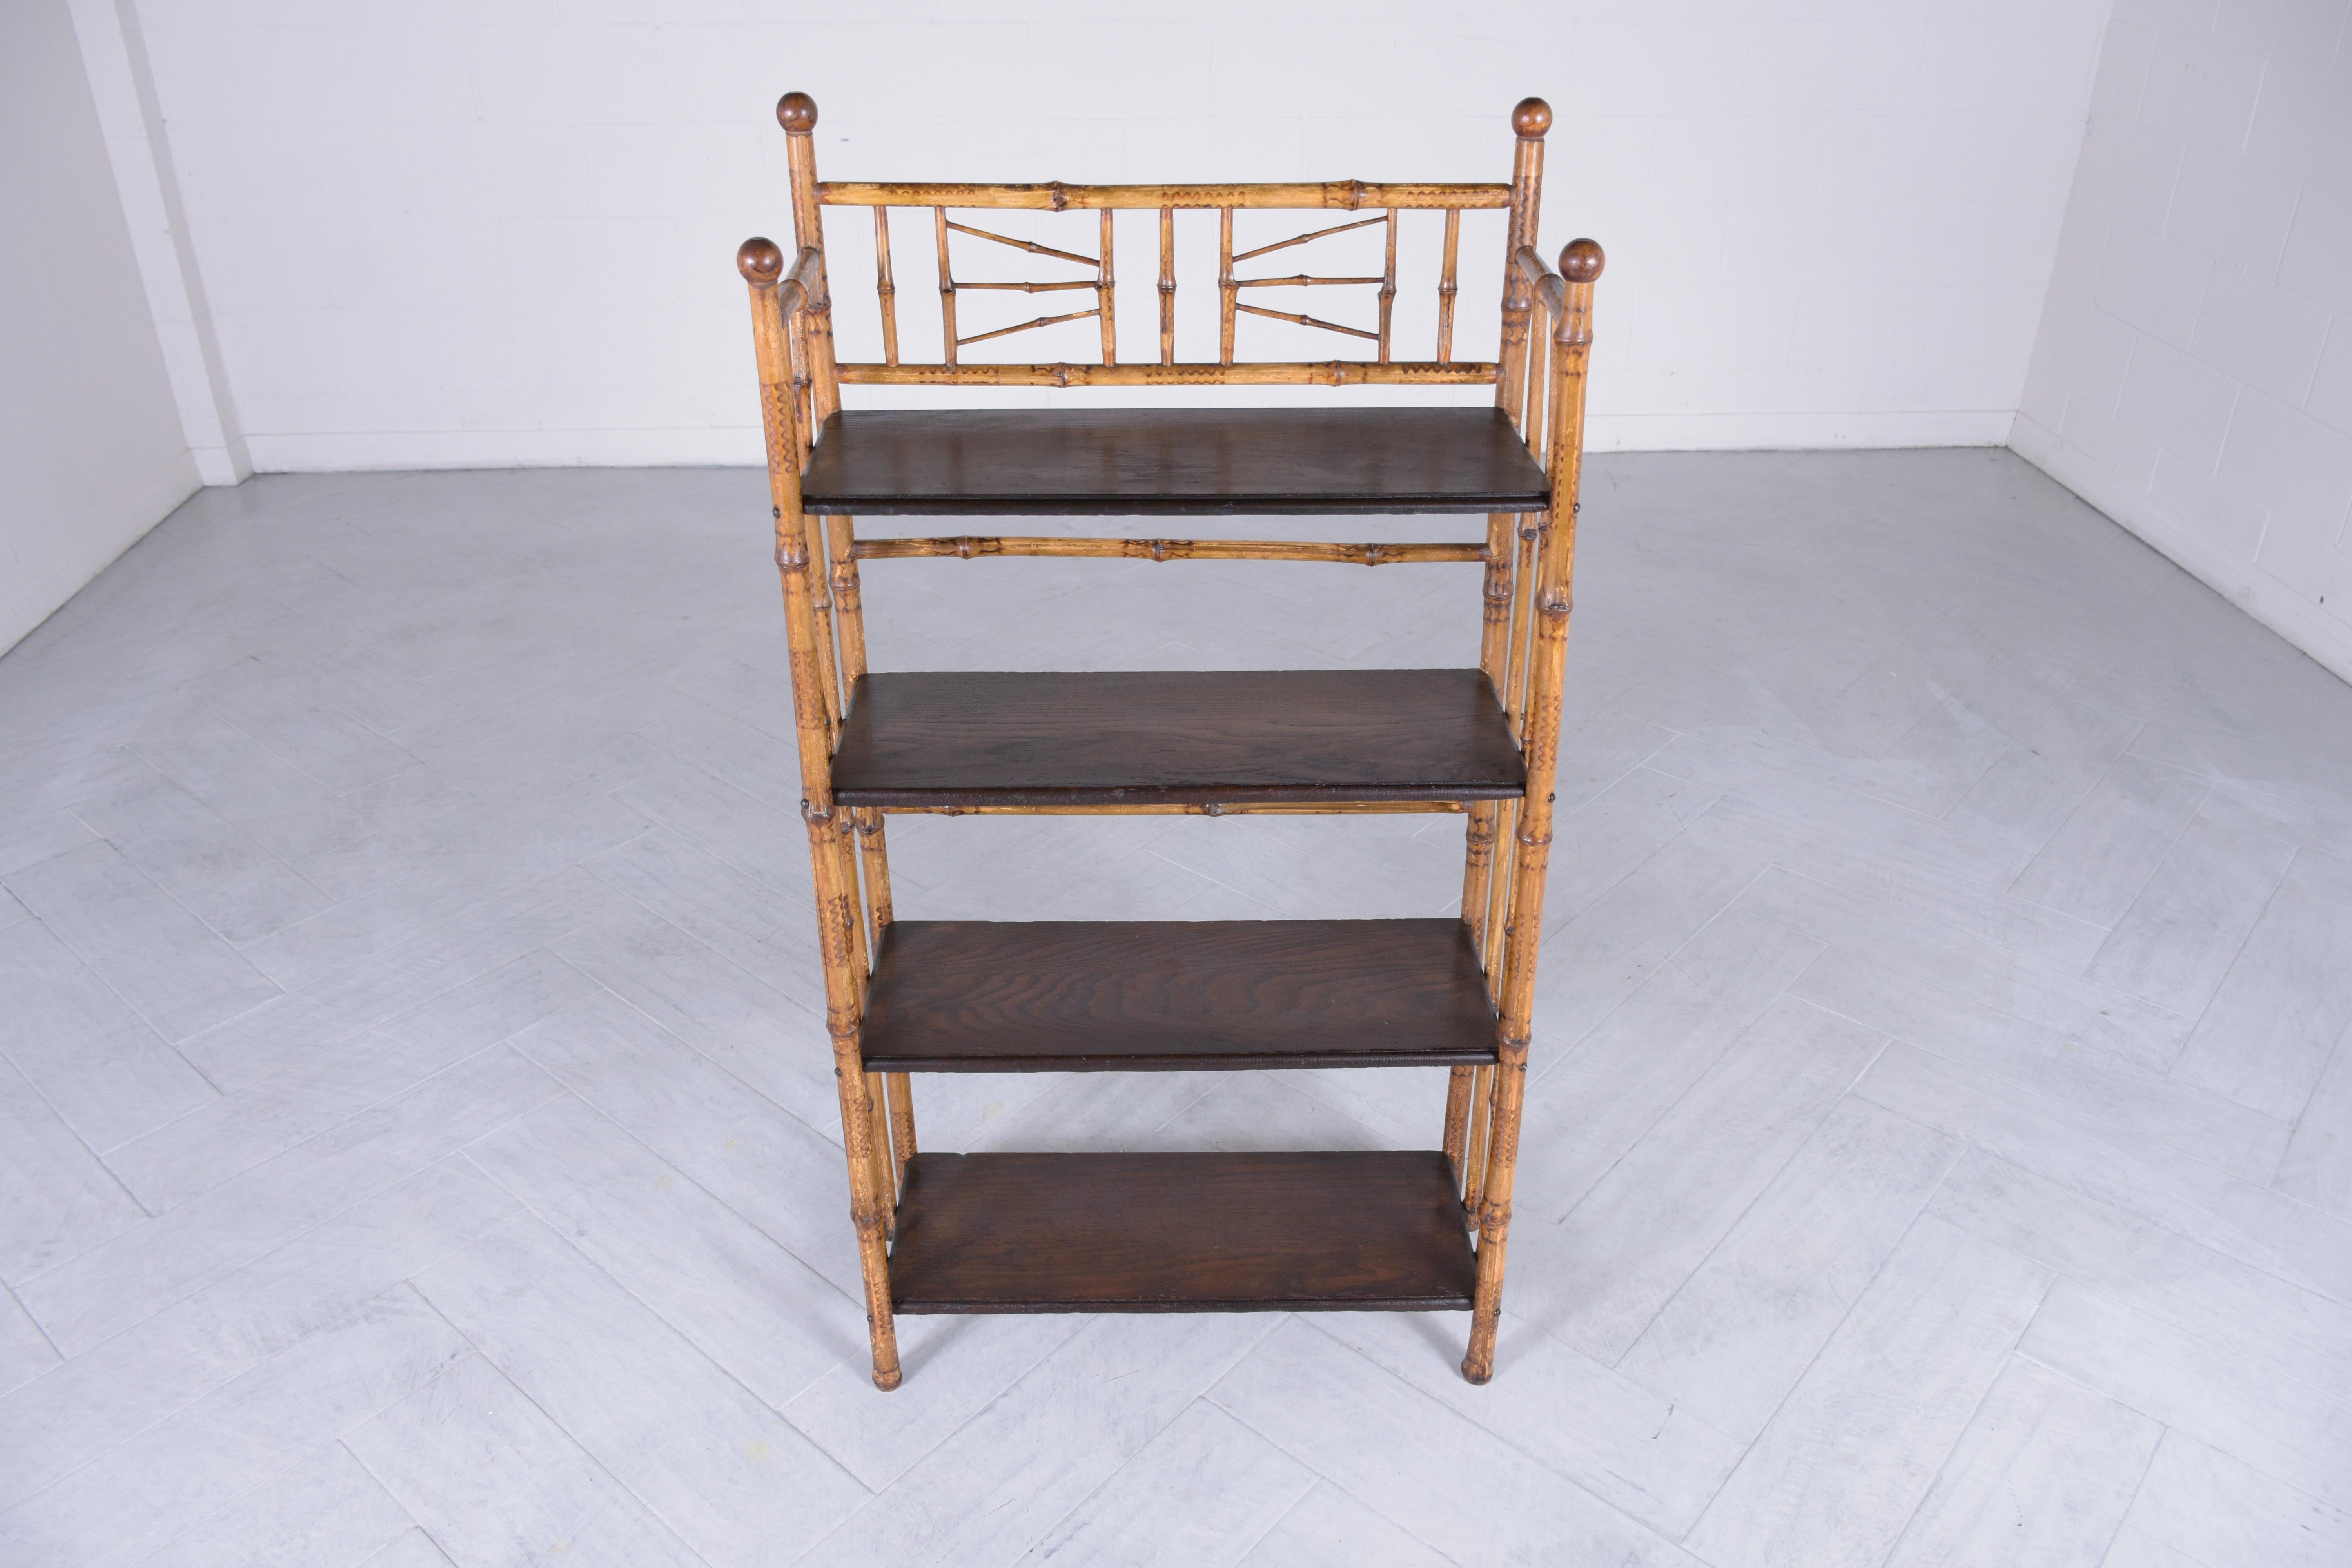 This vintage bamboo small bookshelf is in good condition beautifully crafted out of wood with a faux bamboo design and has been newly restored by our professional craftsmen team. This lovely etagere features a natural color frame and dark brown